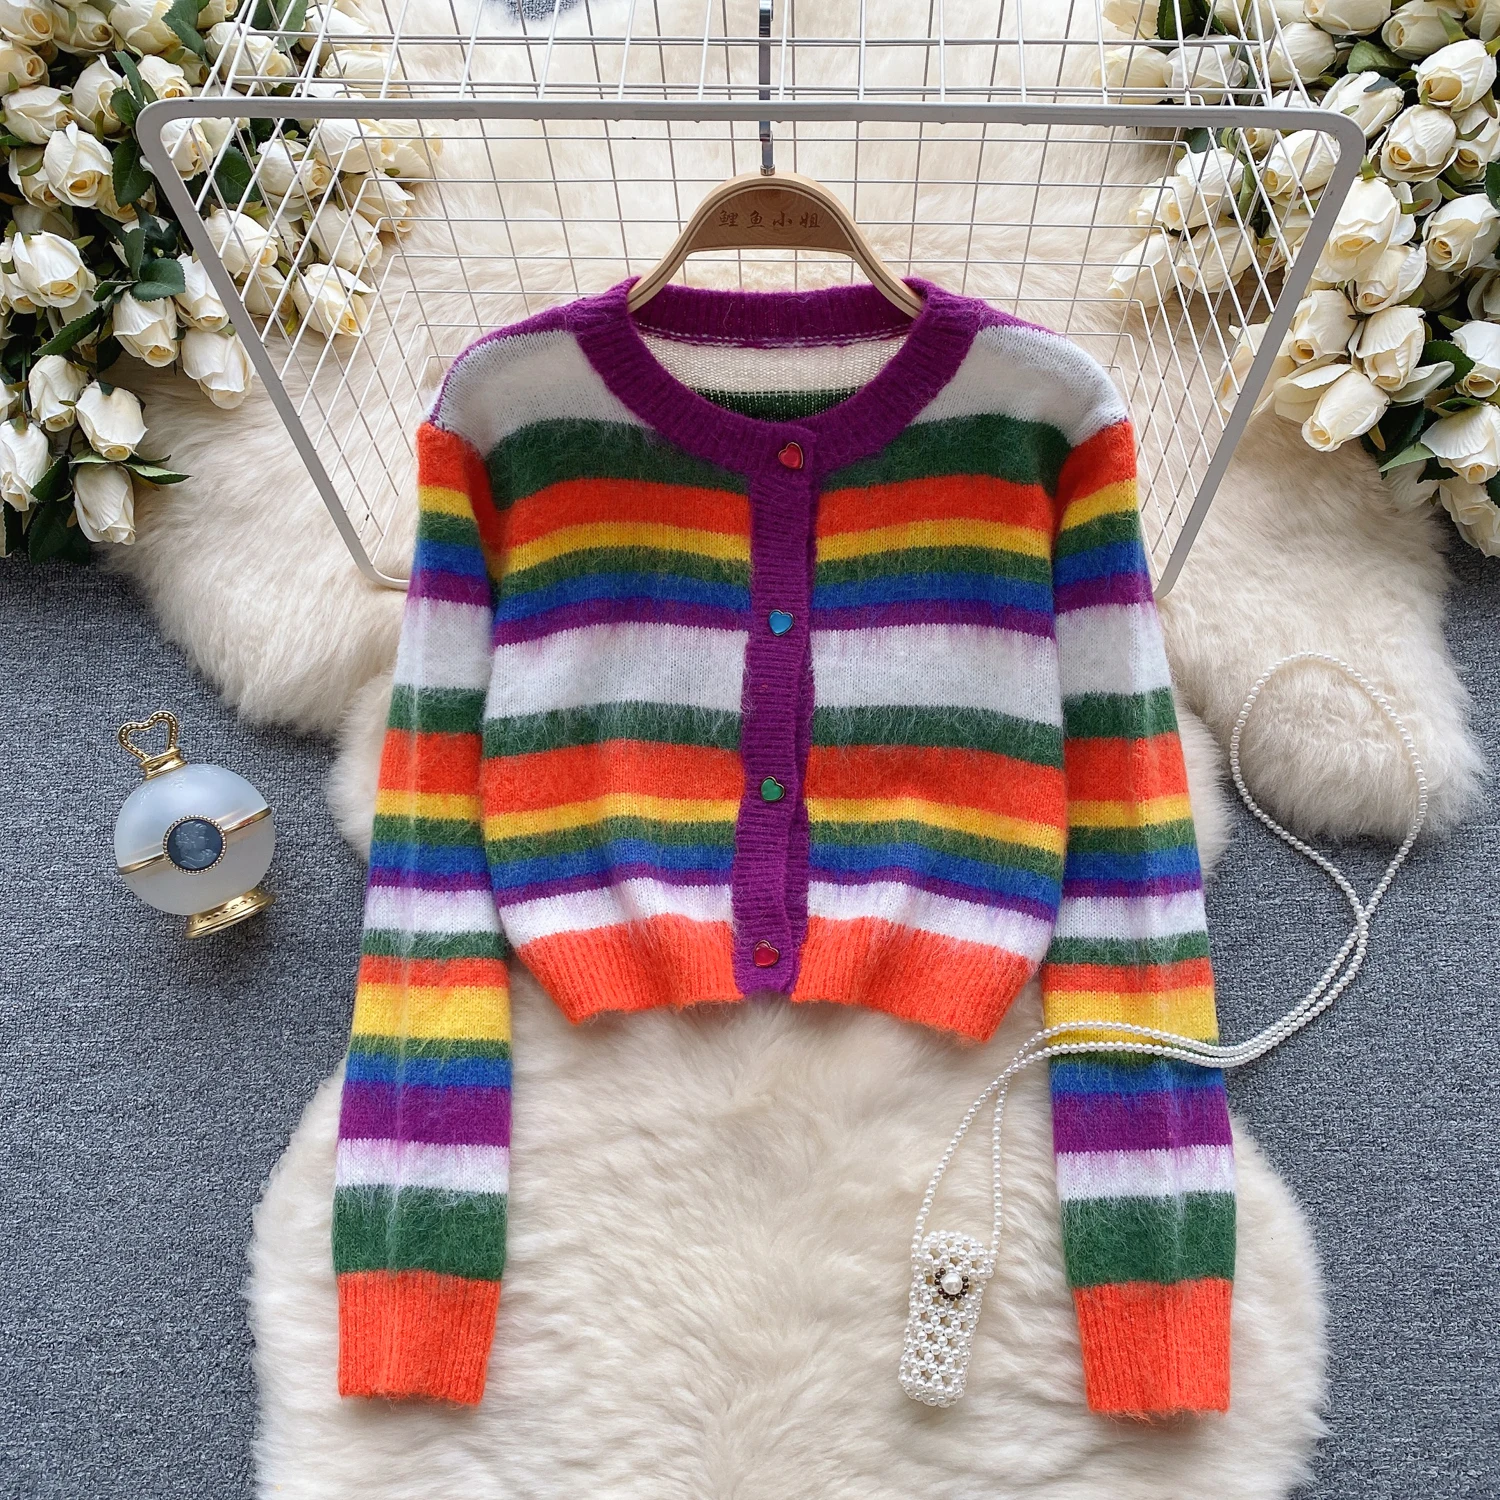 

Autumn Women Rainbow Striped Sweater Cute O-neck Long Sleeve Love Button Cardigans Tops Contrast Color Sweet Female Knitshirts